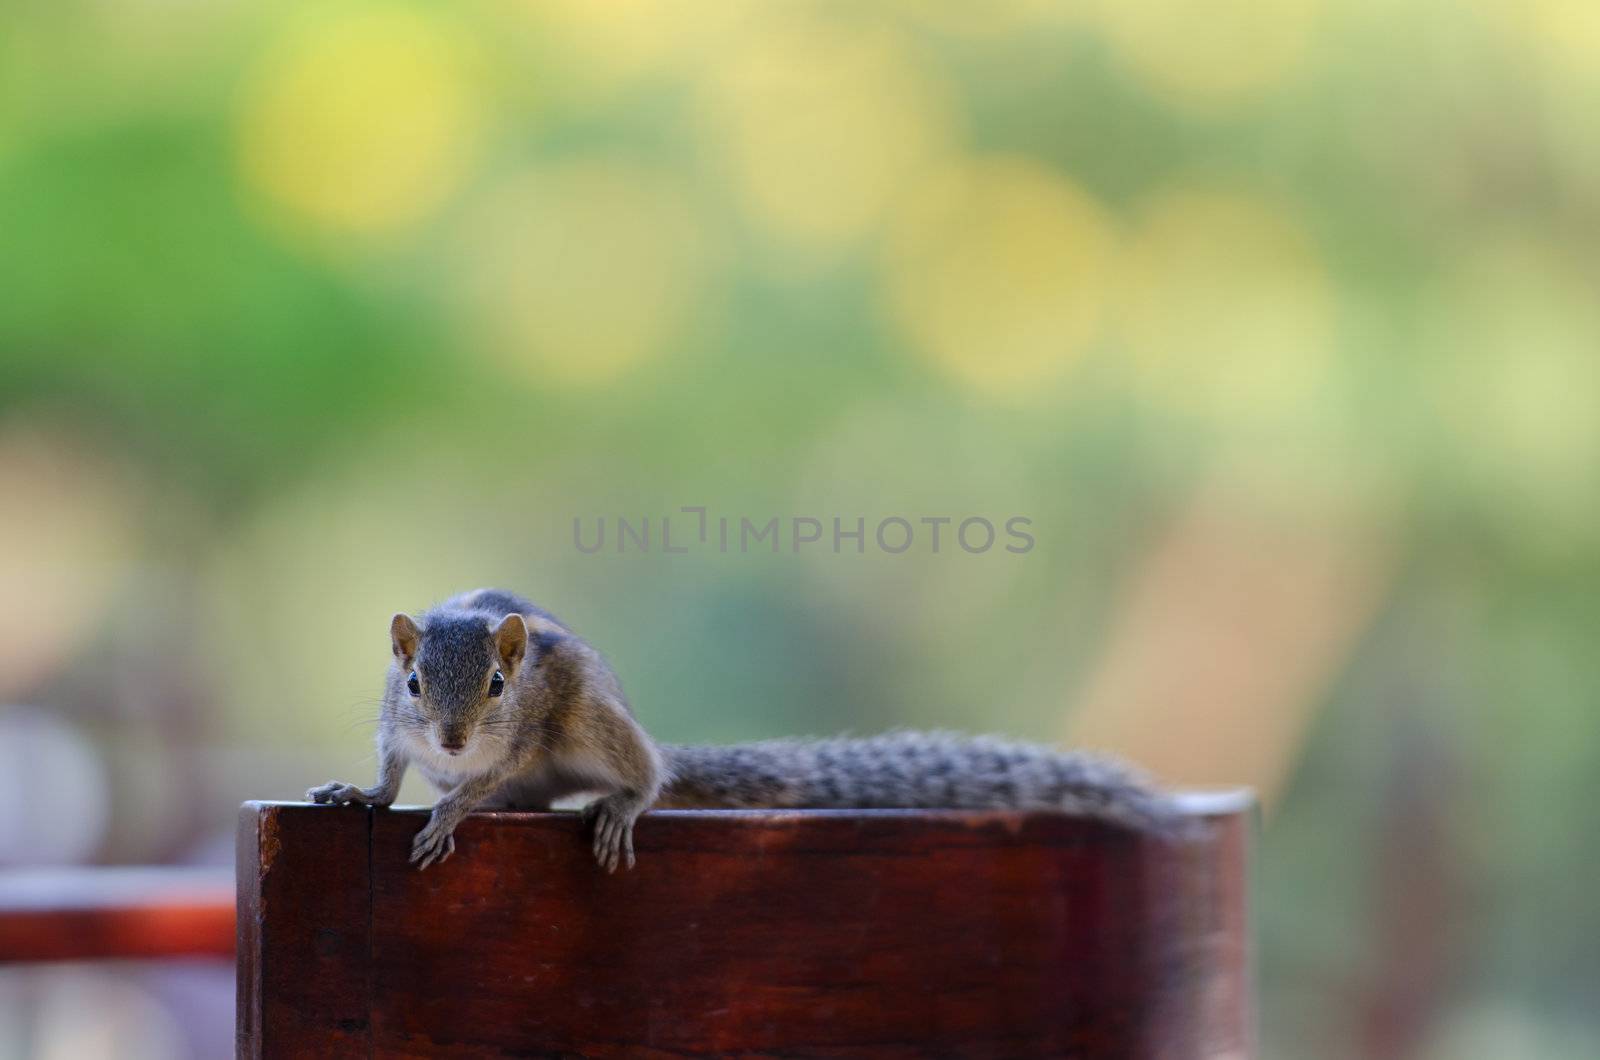 Curious downy chipmunk on chair Selective focus on the eye.